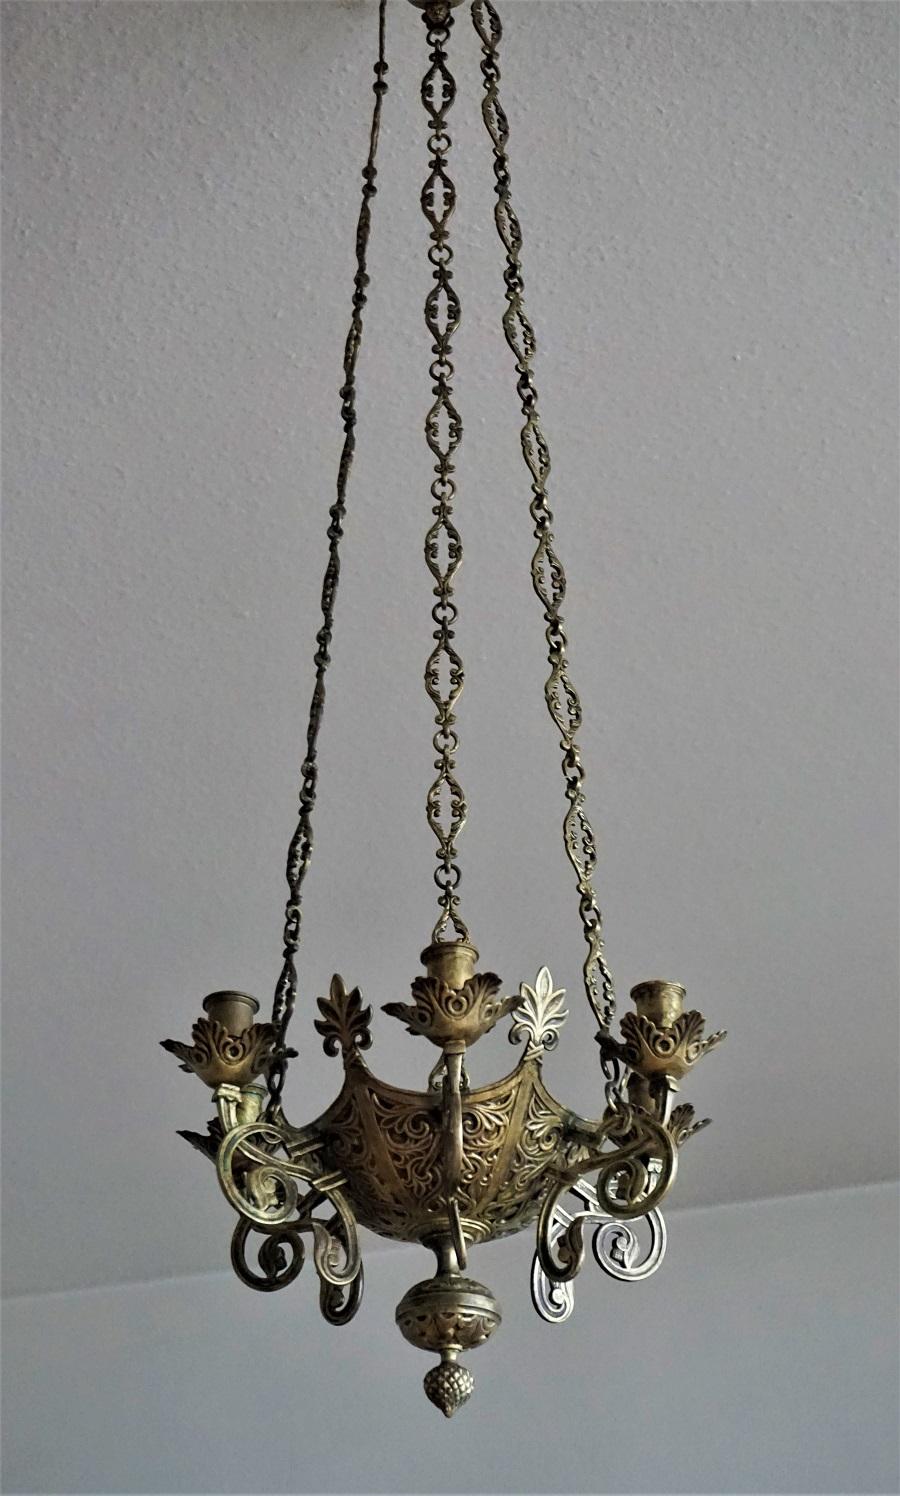 A Gothic Revival style bronze and parcel-brass church candle chandelier / hanging sanctuary lamp, Spain, mid-18th century, probably from a family with a private chapel. Crown shape body surrounded by six candle holders. Three long bronze chains